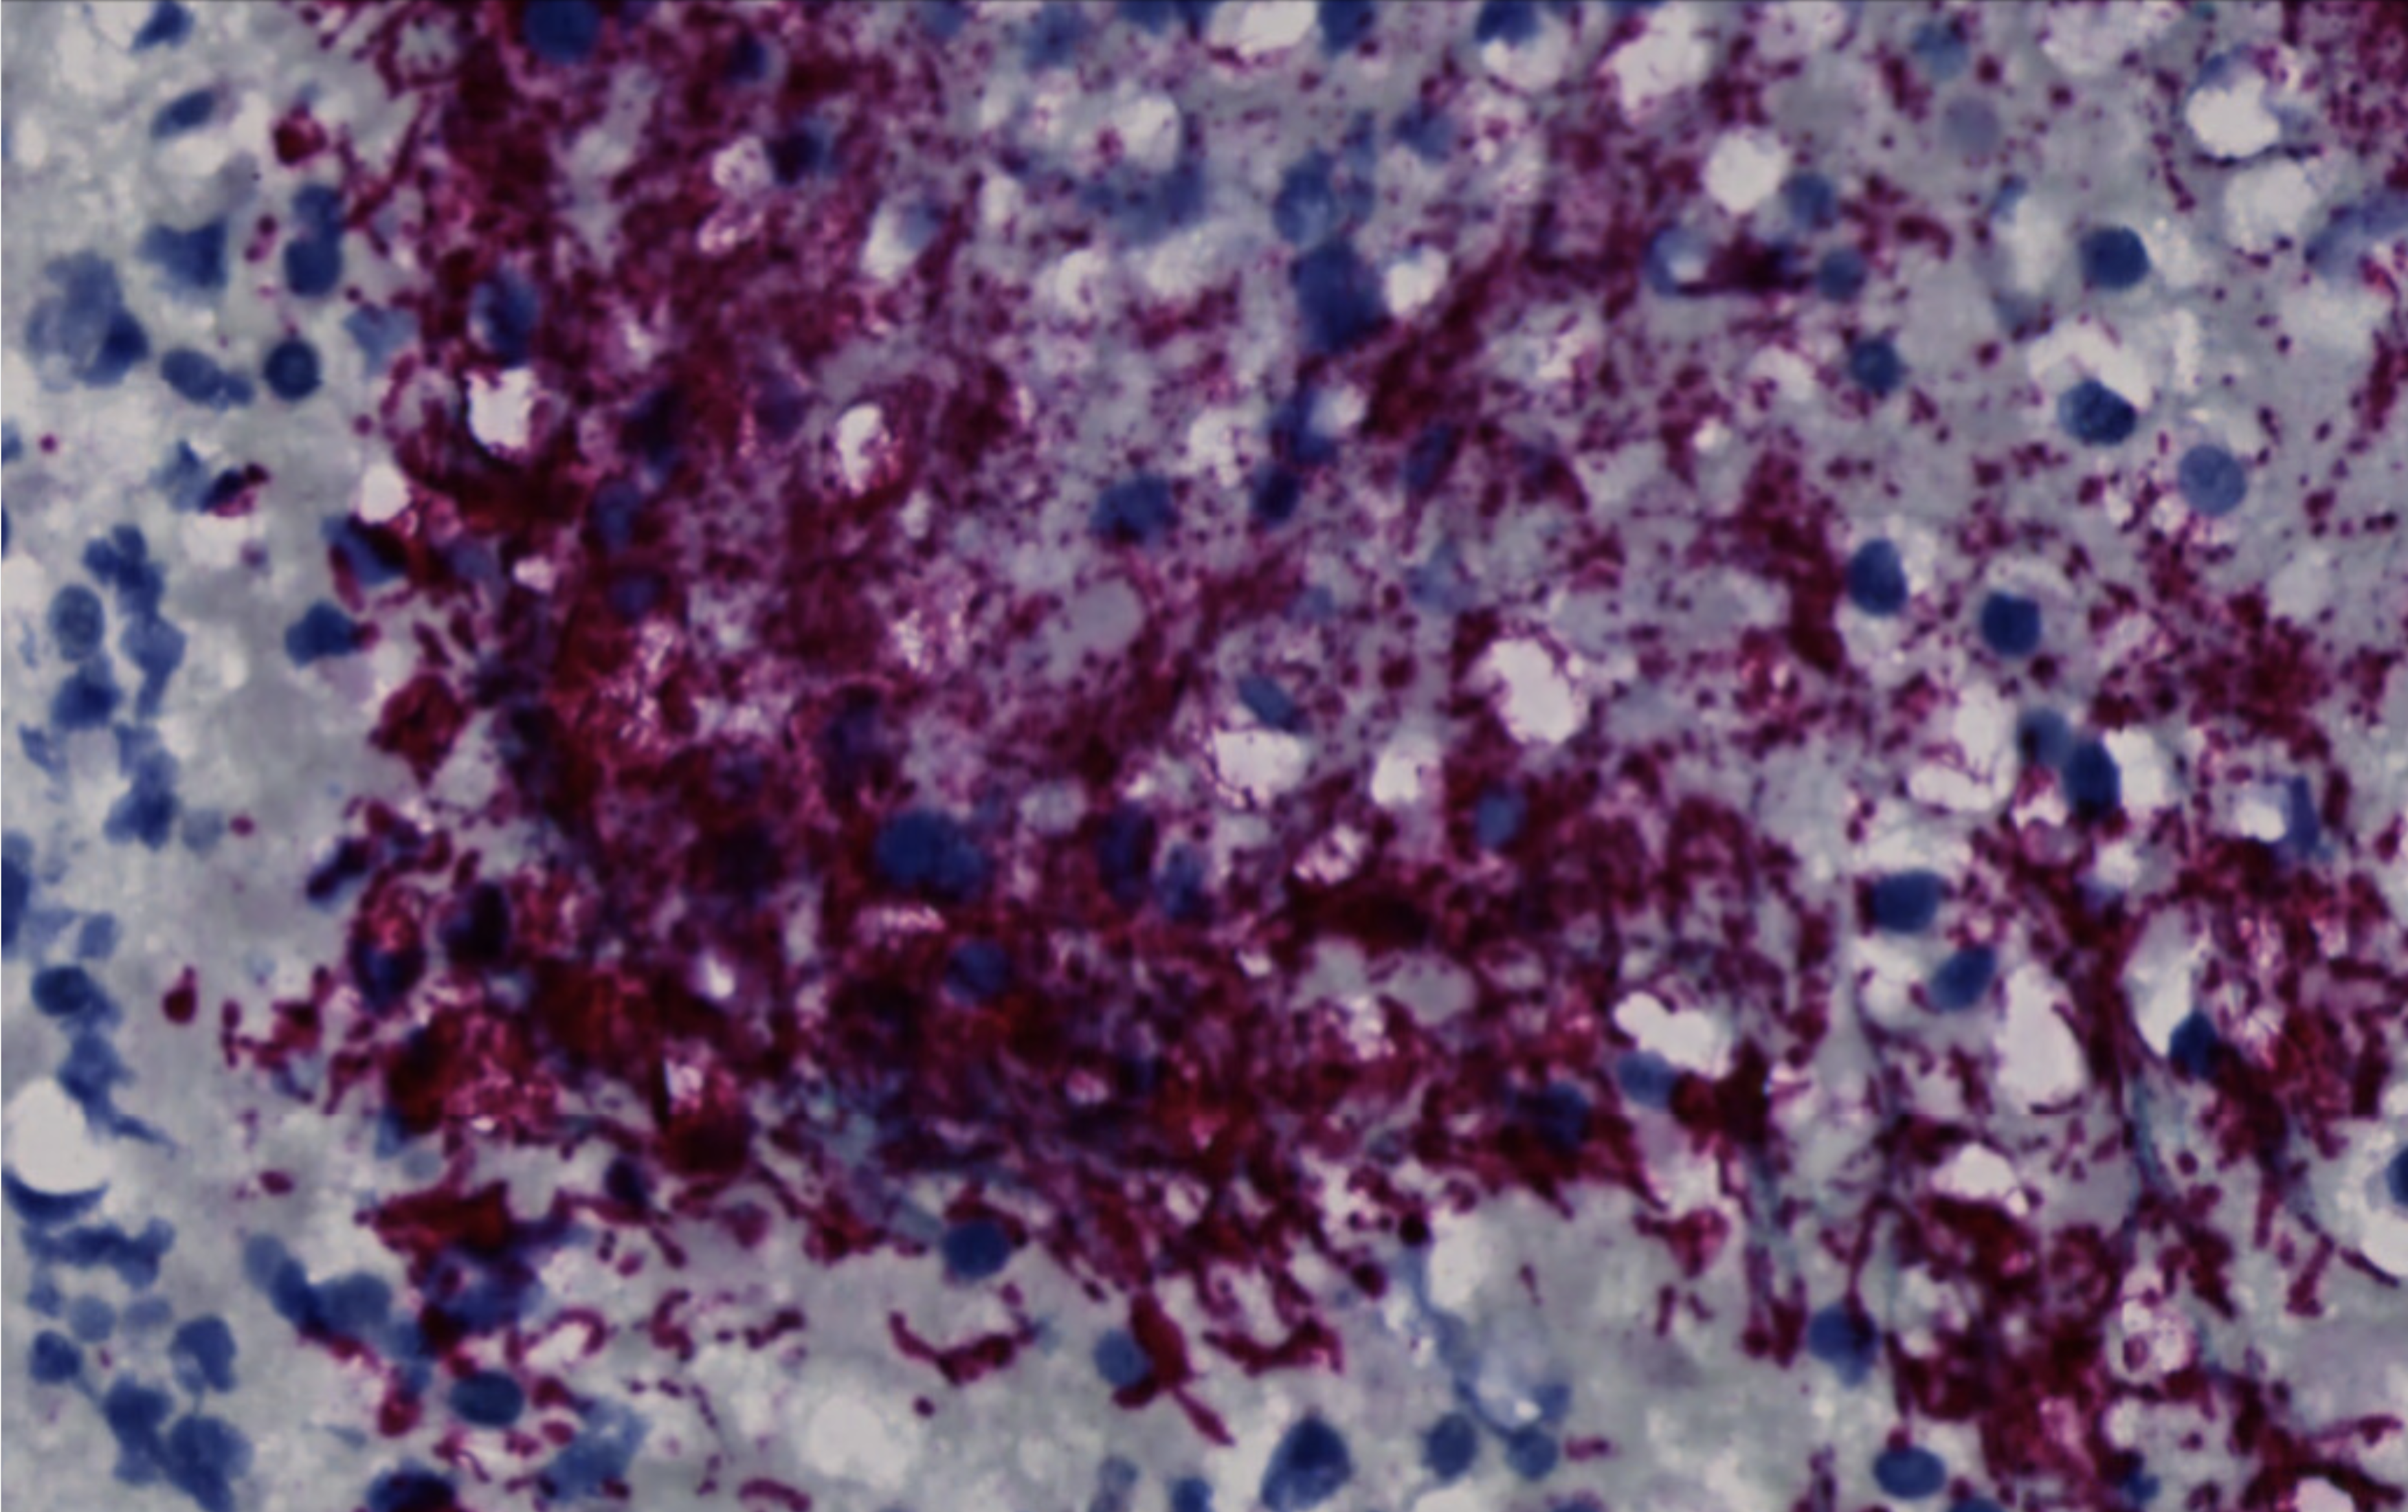 Fusobacterium nucleatum bacteria (purple) in a human colorectal cancer tumor.